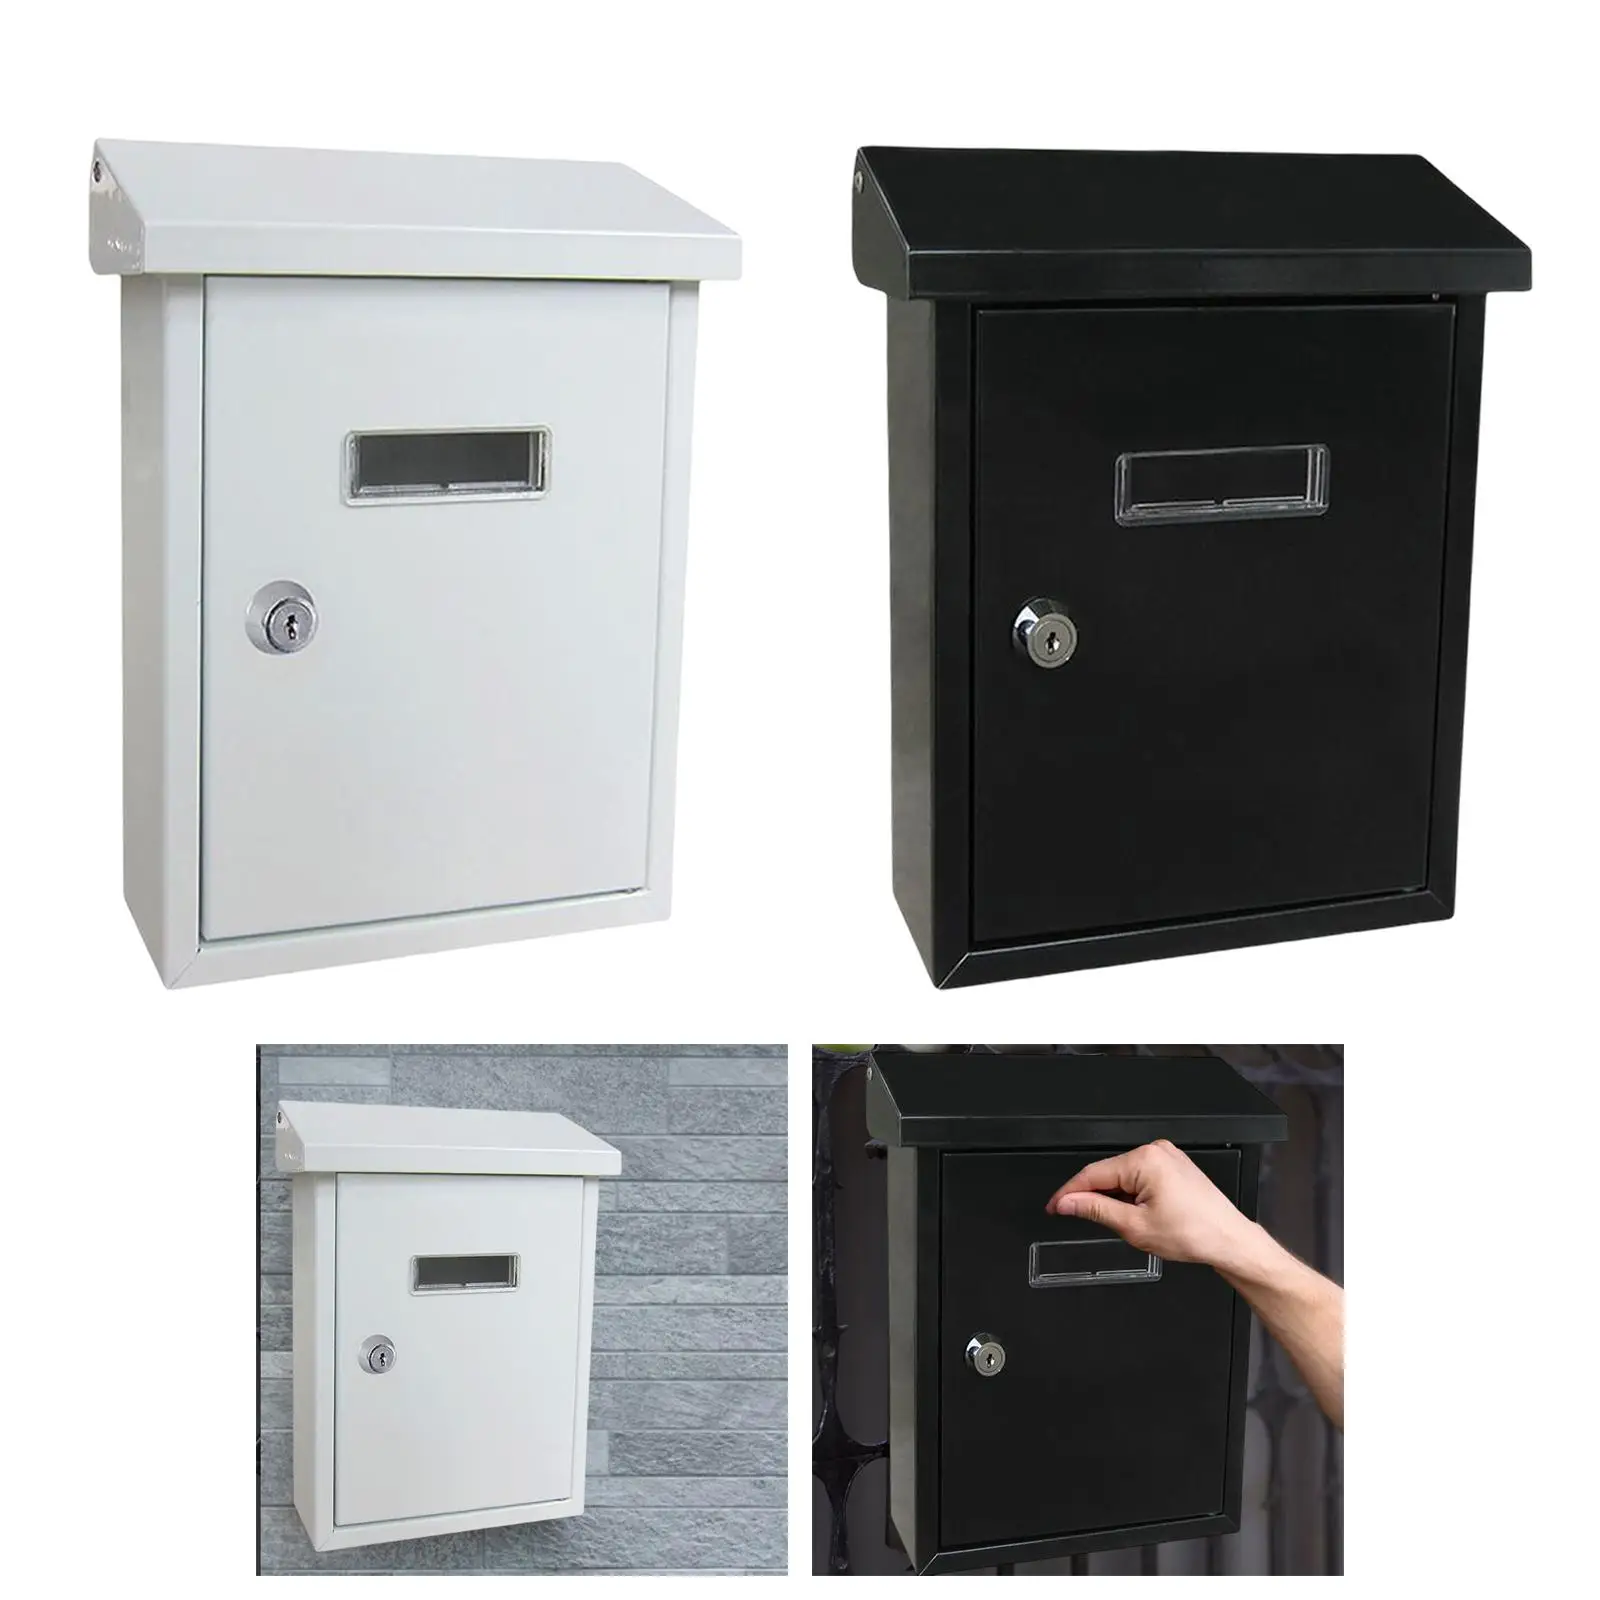 Lockable Wall Mount Mailbox Newspaper Letterbox Mail Box for Business Home Decor Office